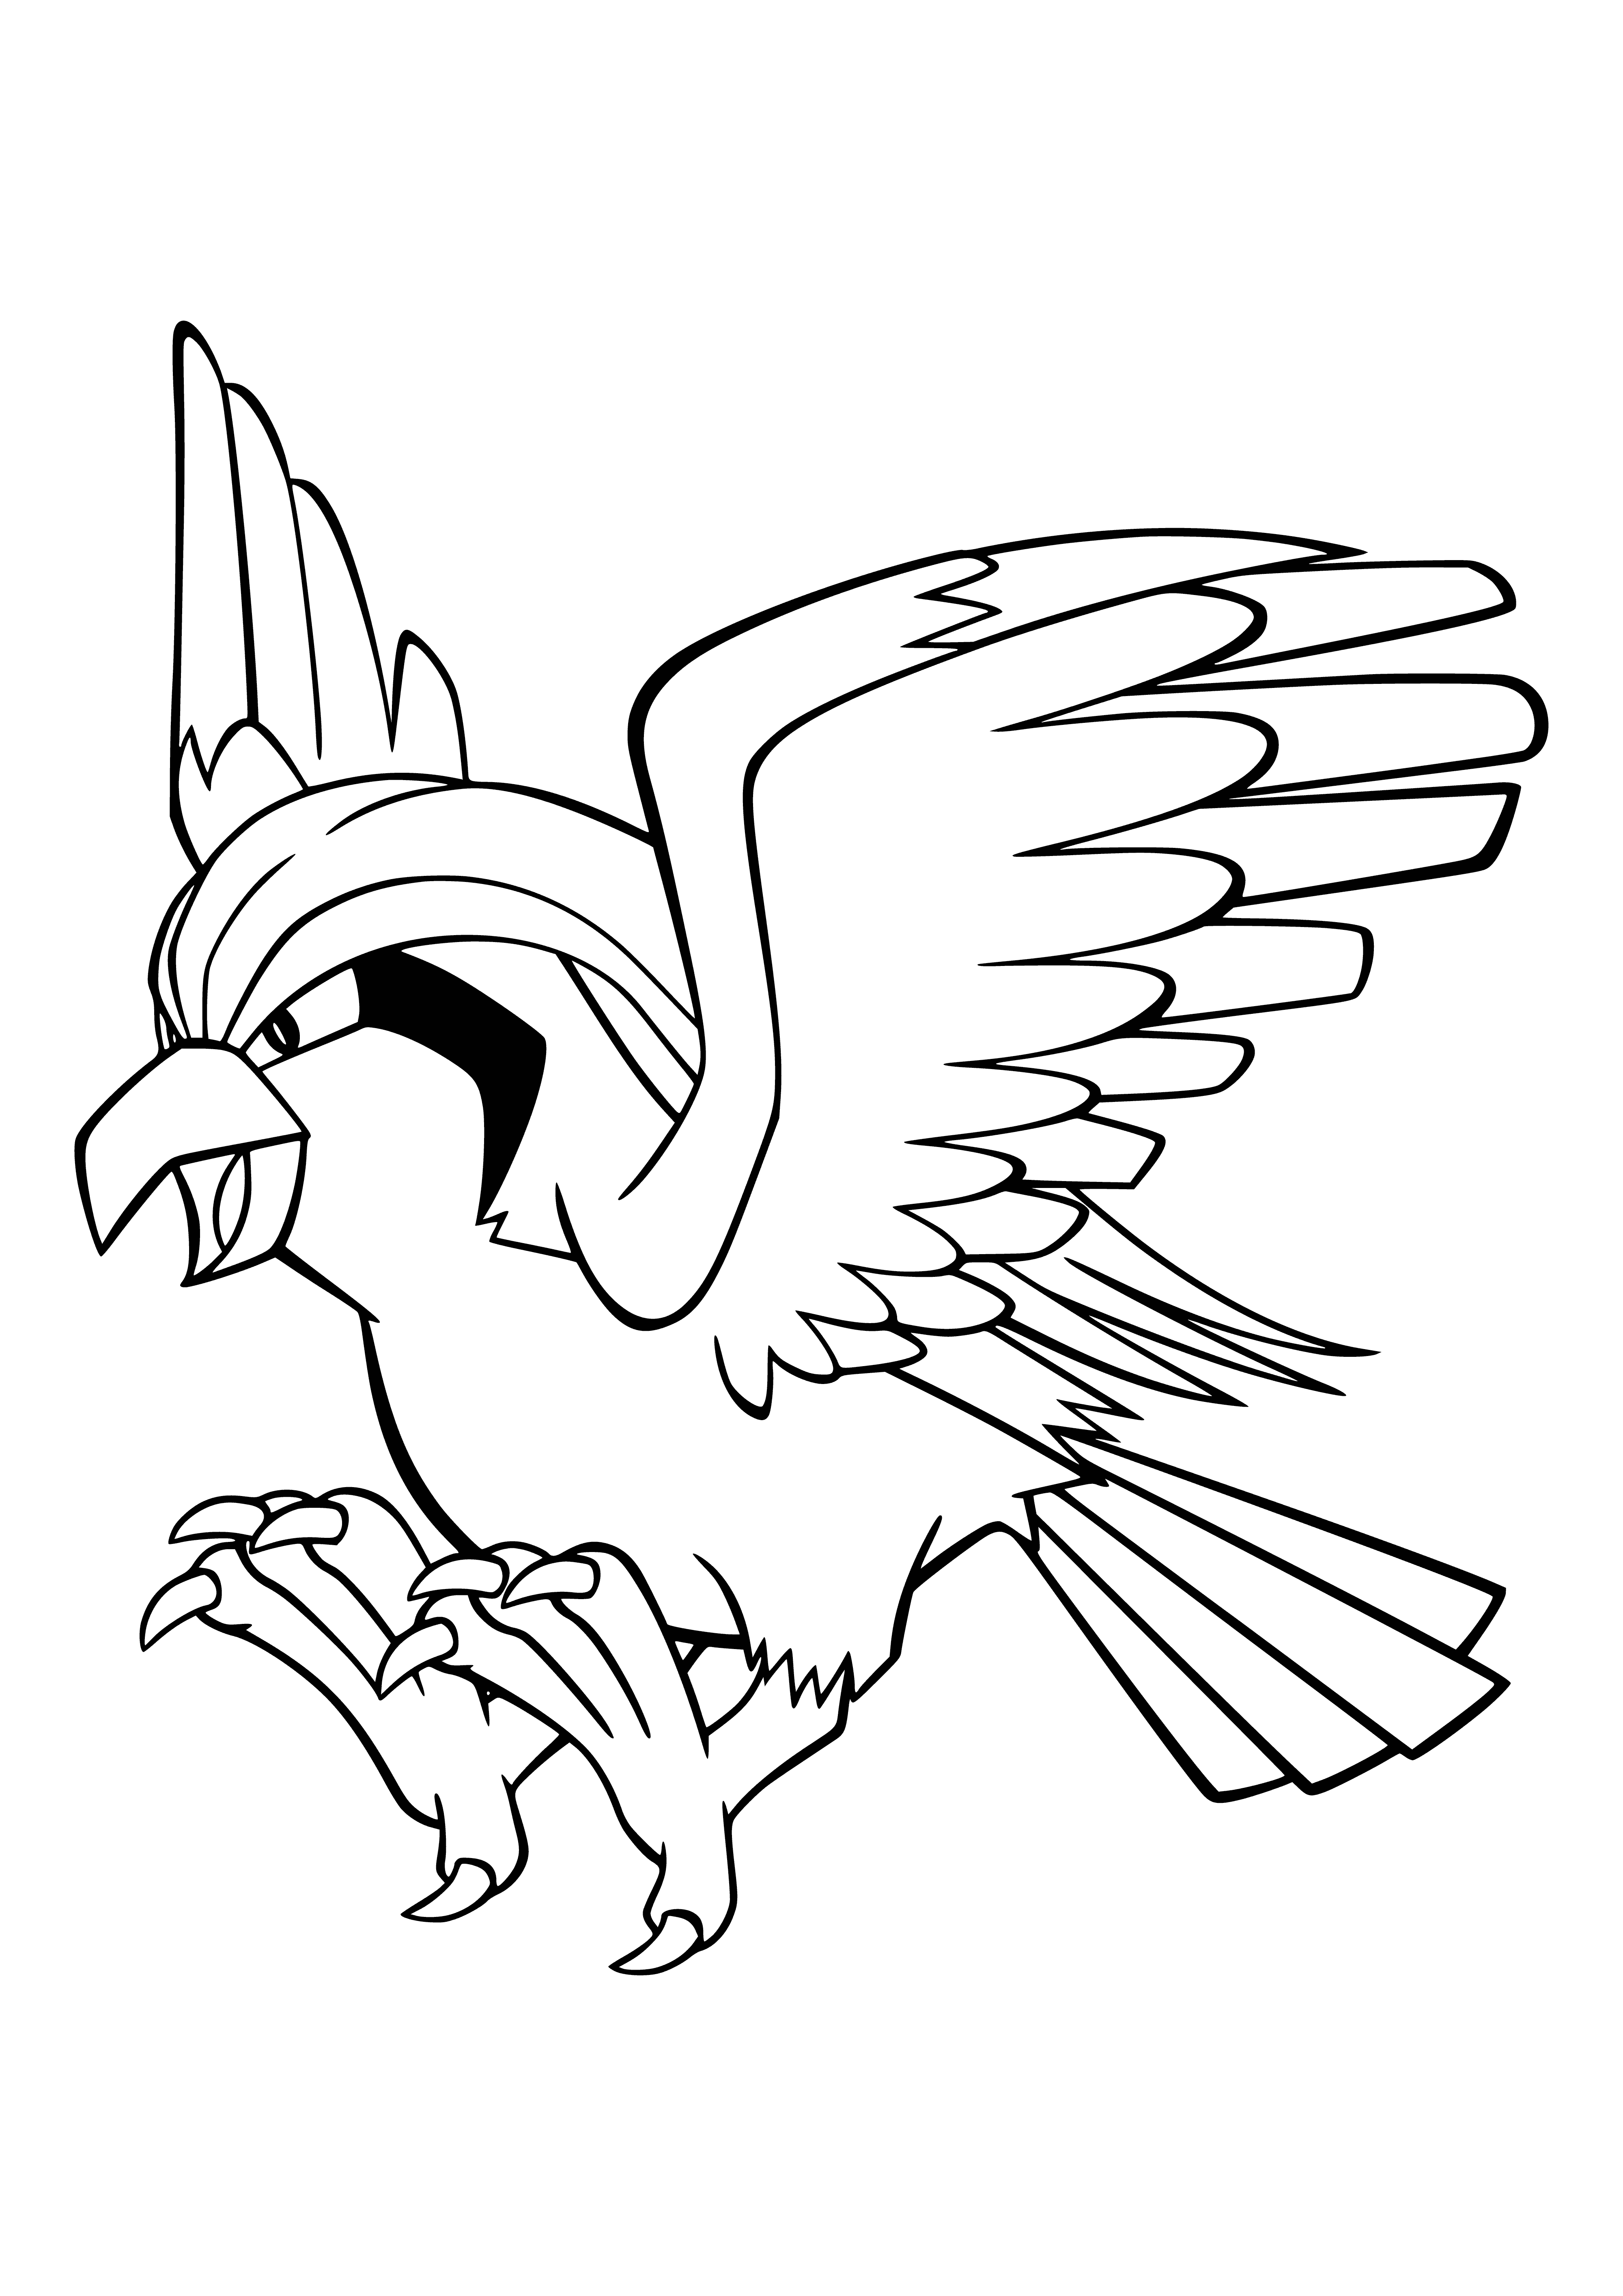 coloring page: Powerful Pidgeot has long neck & legs that allow it to fly at high speeds & create powerful gusts of wind capable of blowing houses down.